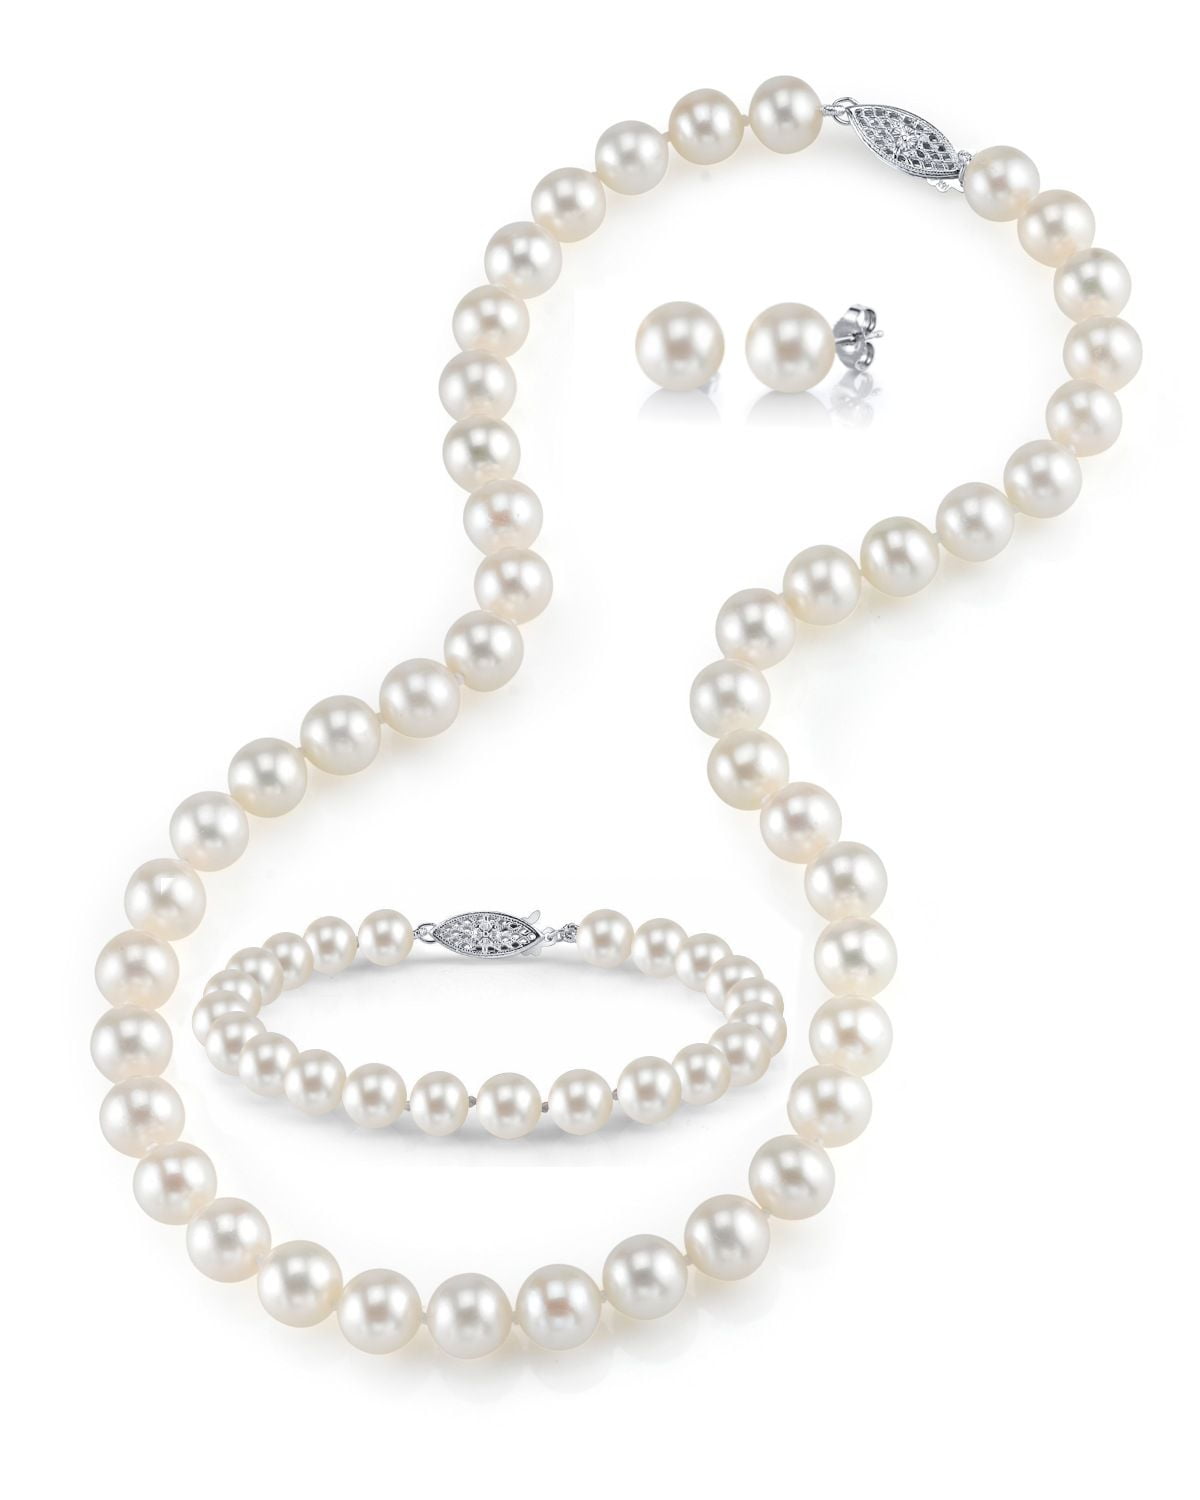 JYX 9-10mm Round Freshwater Pearl Necklace and Bracelet Set 